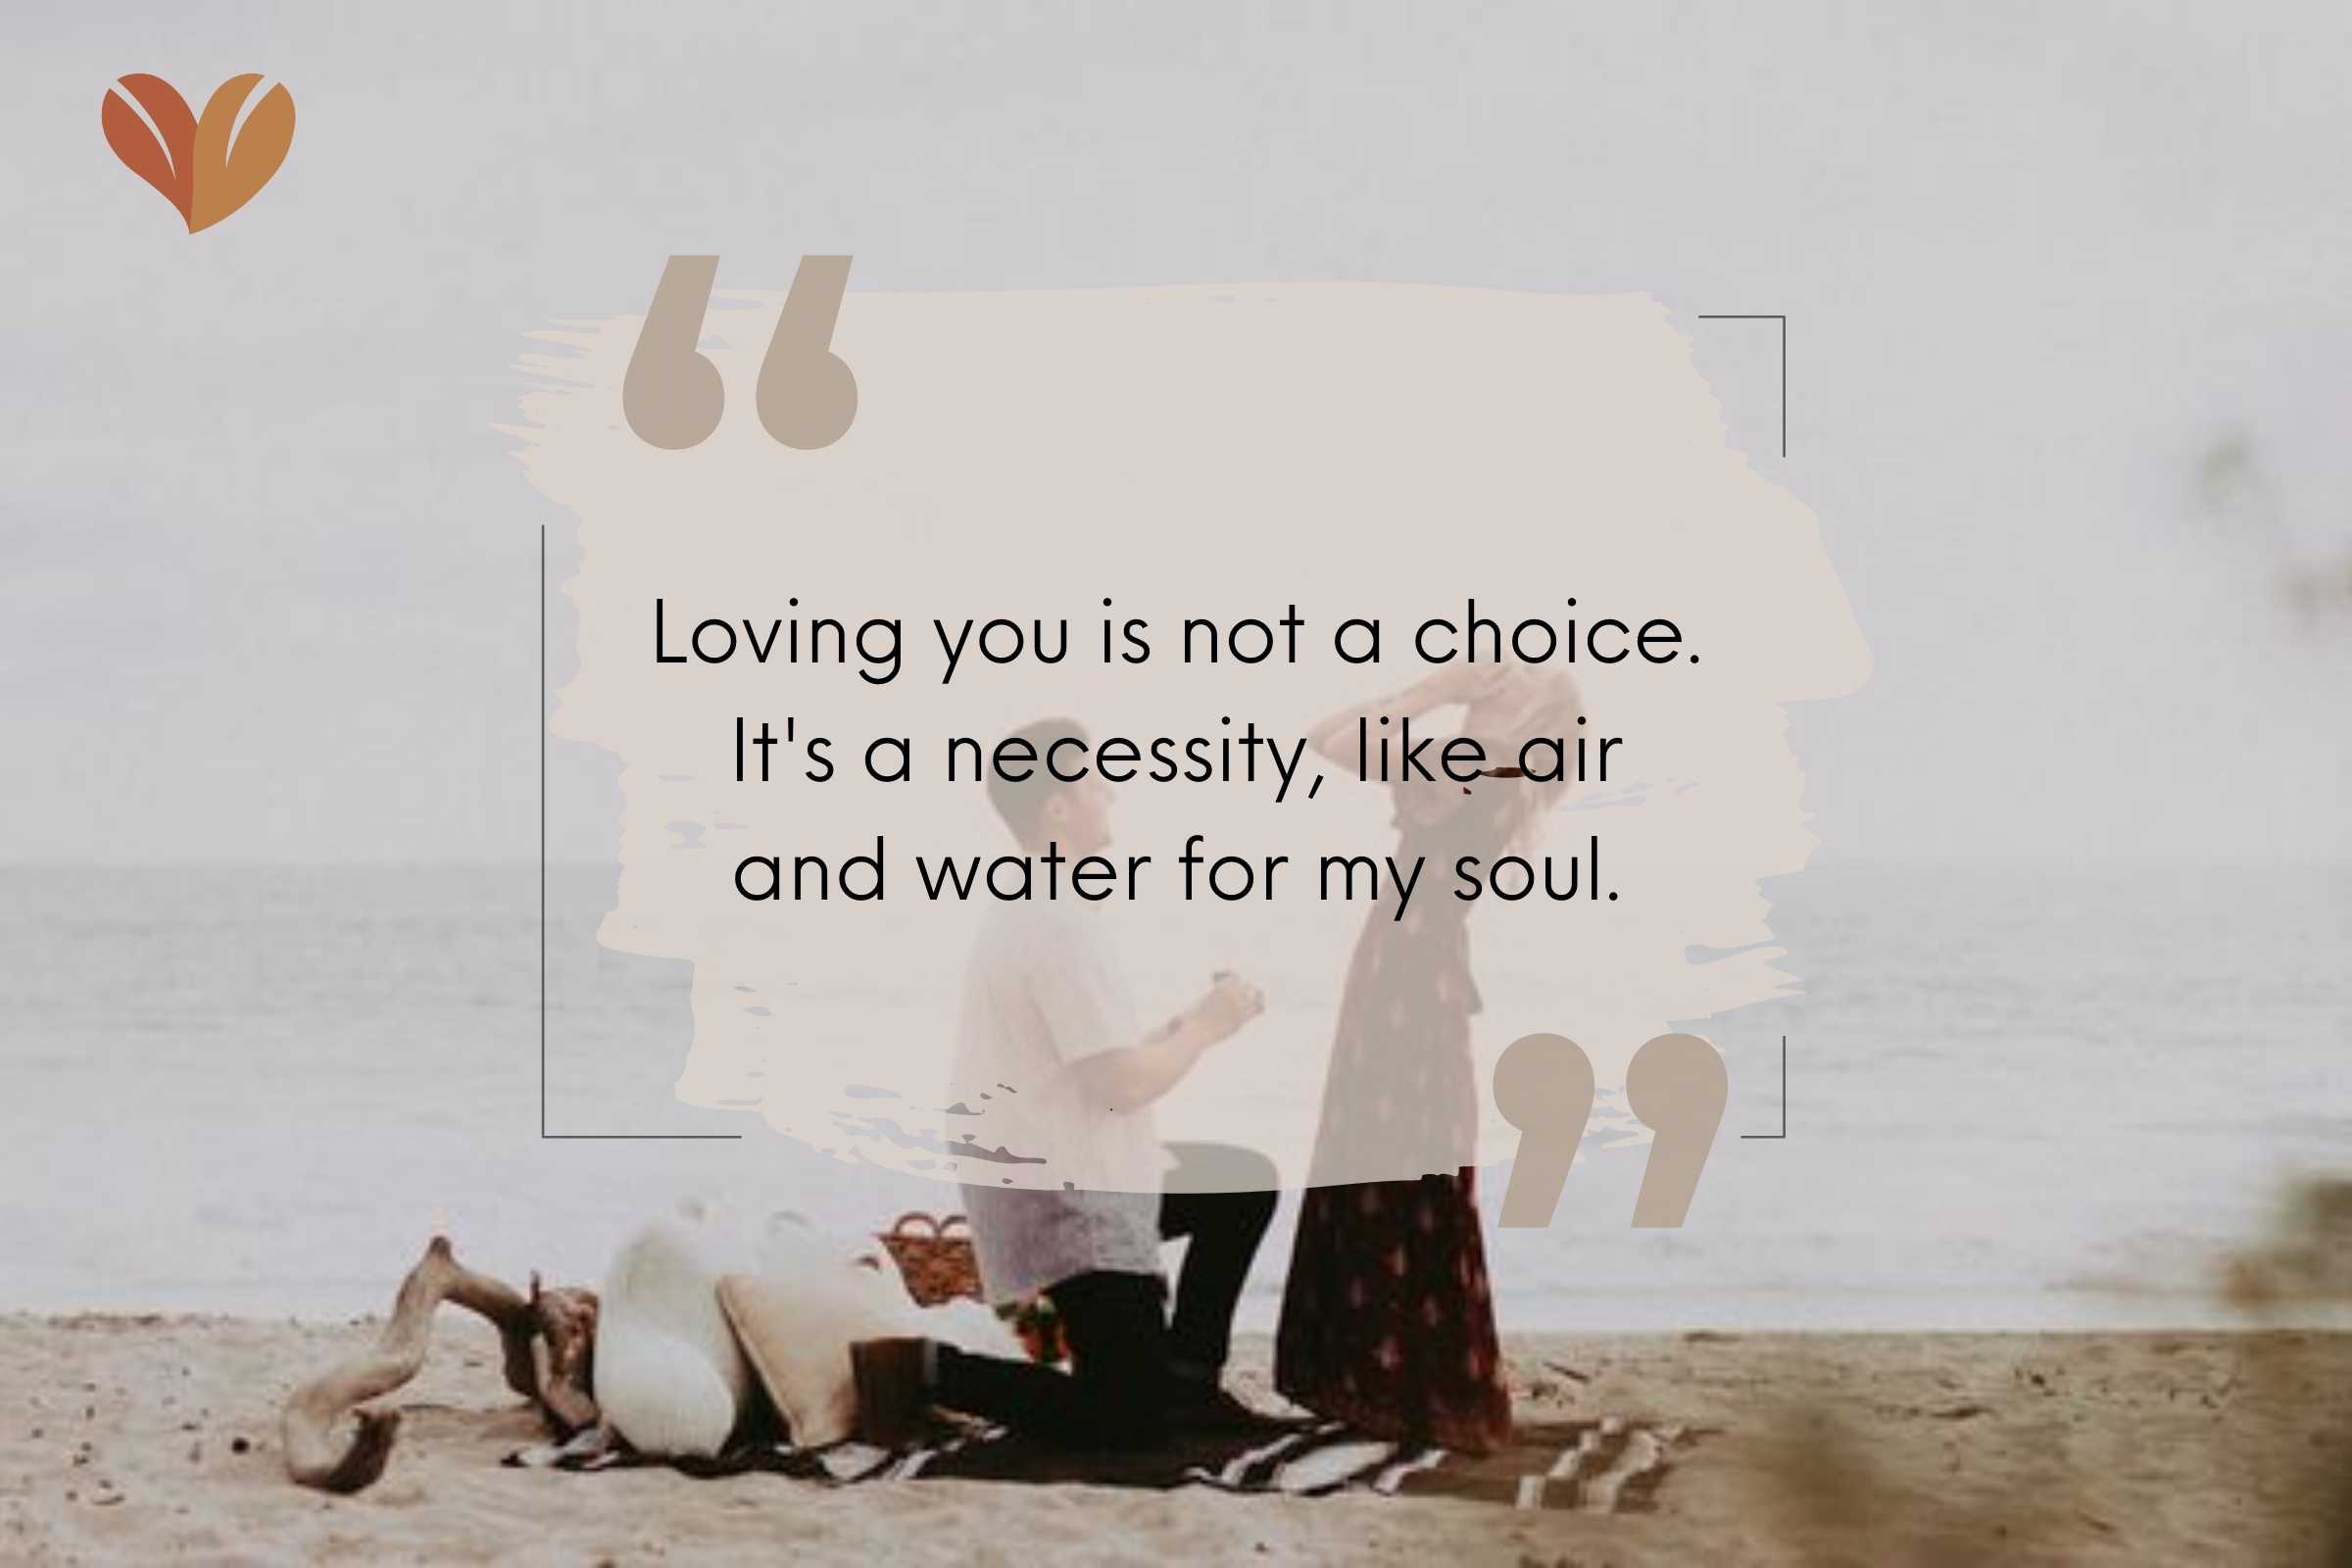 Loving you is not a choice. It's a necessity, like air and water for my soul